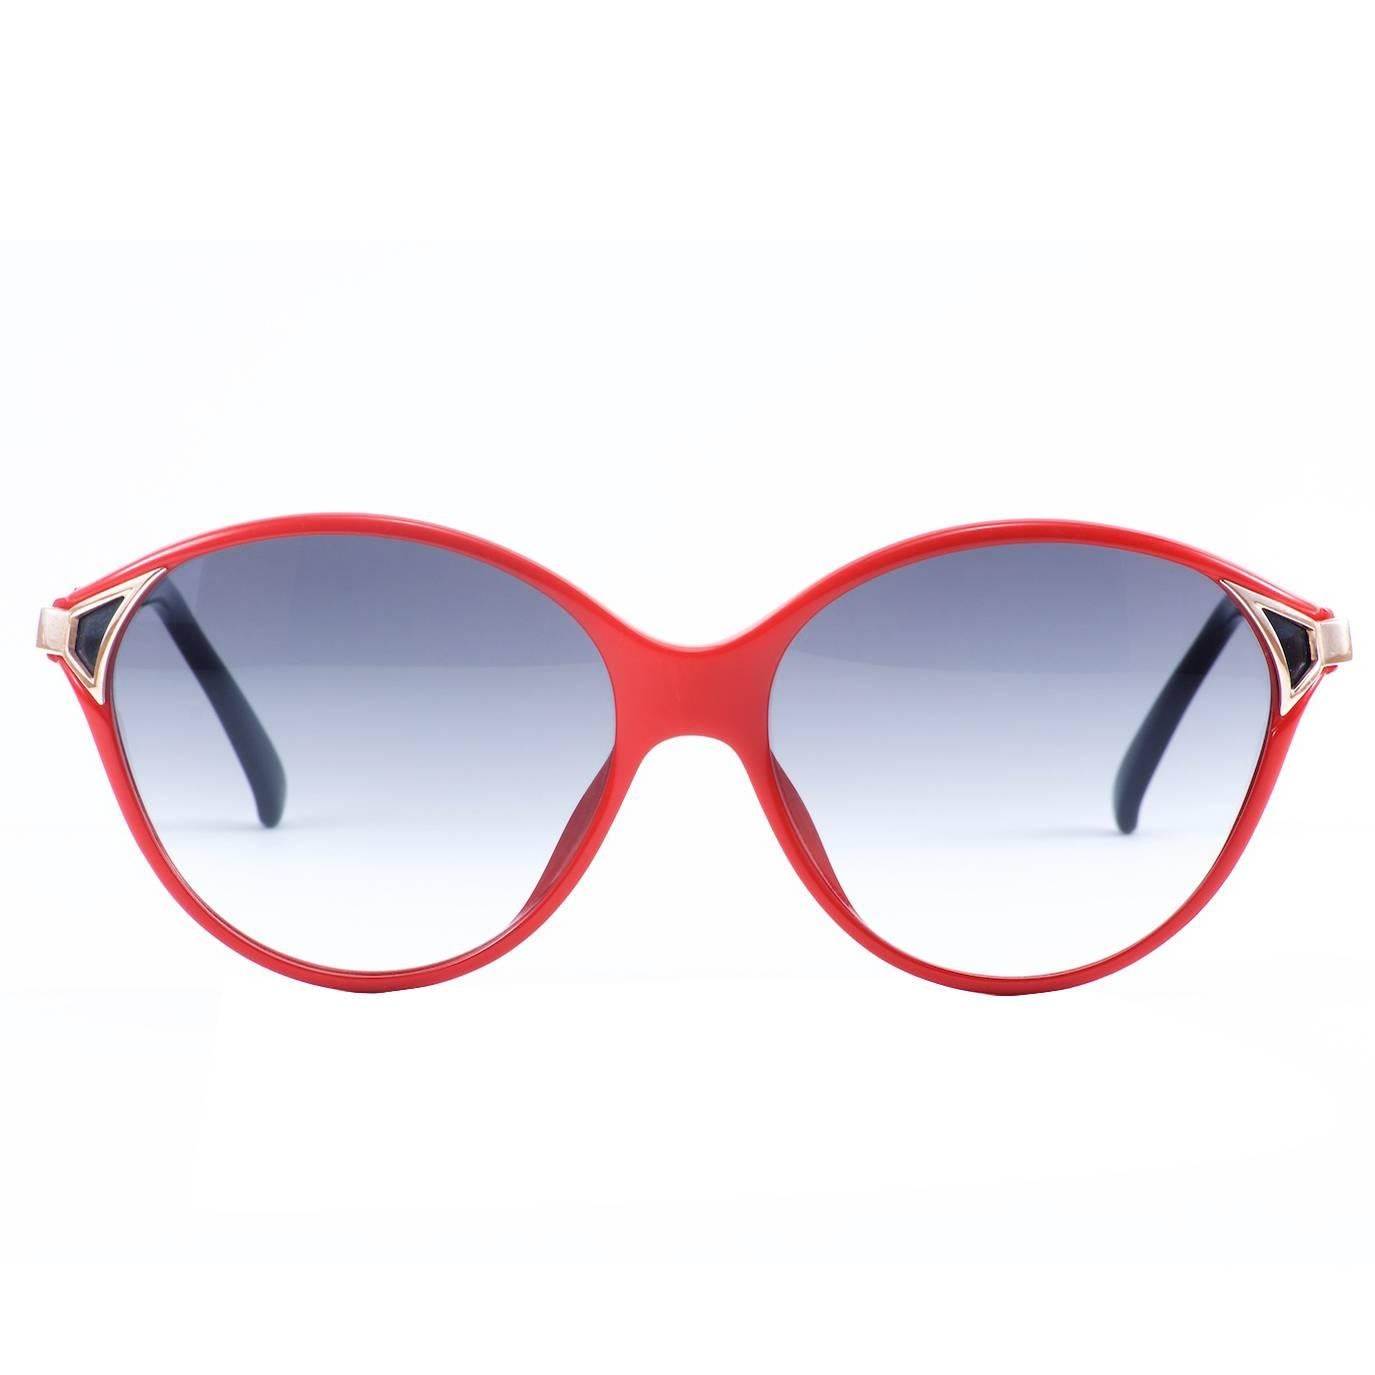 Hotel de Ville's Christian Dior Wire-Topped Sunglasses, Red-Black/Gold accents For Sale